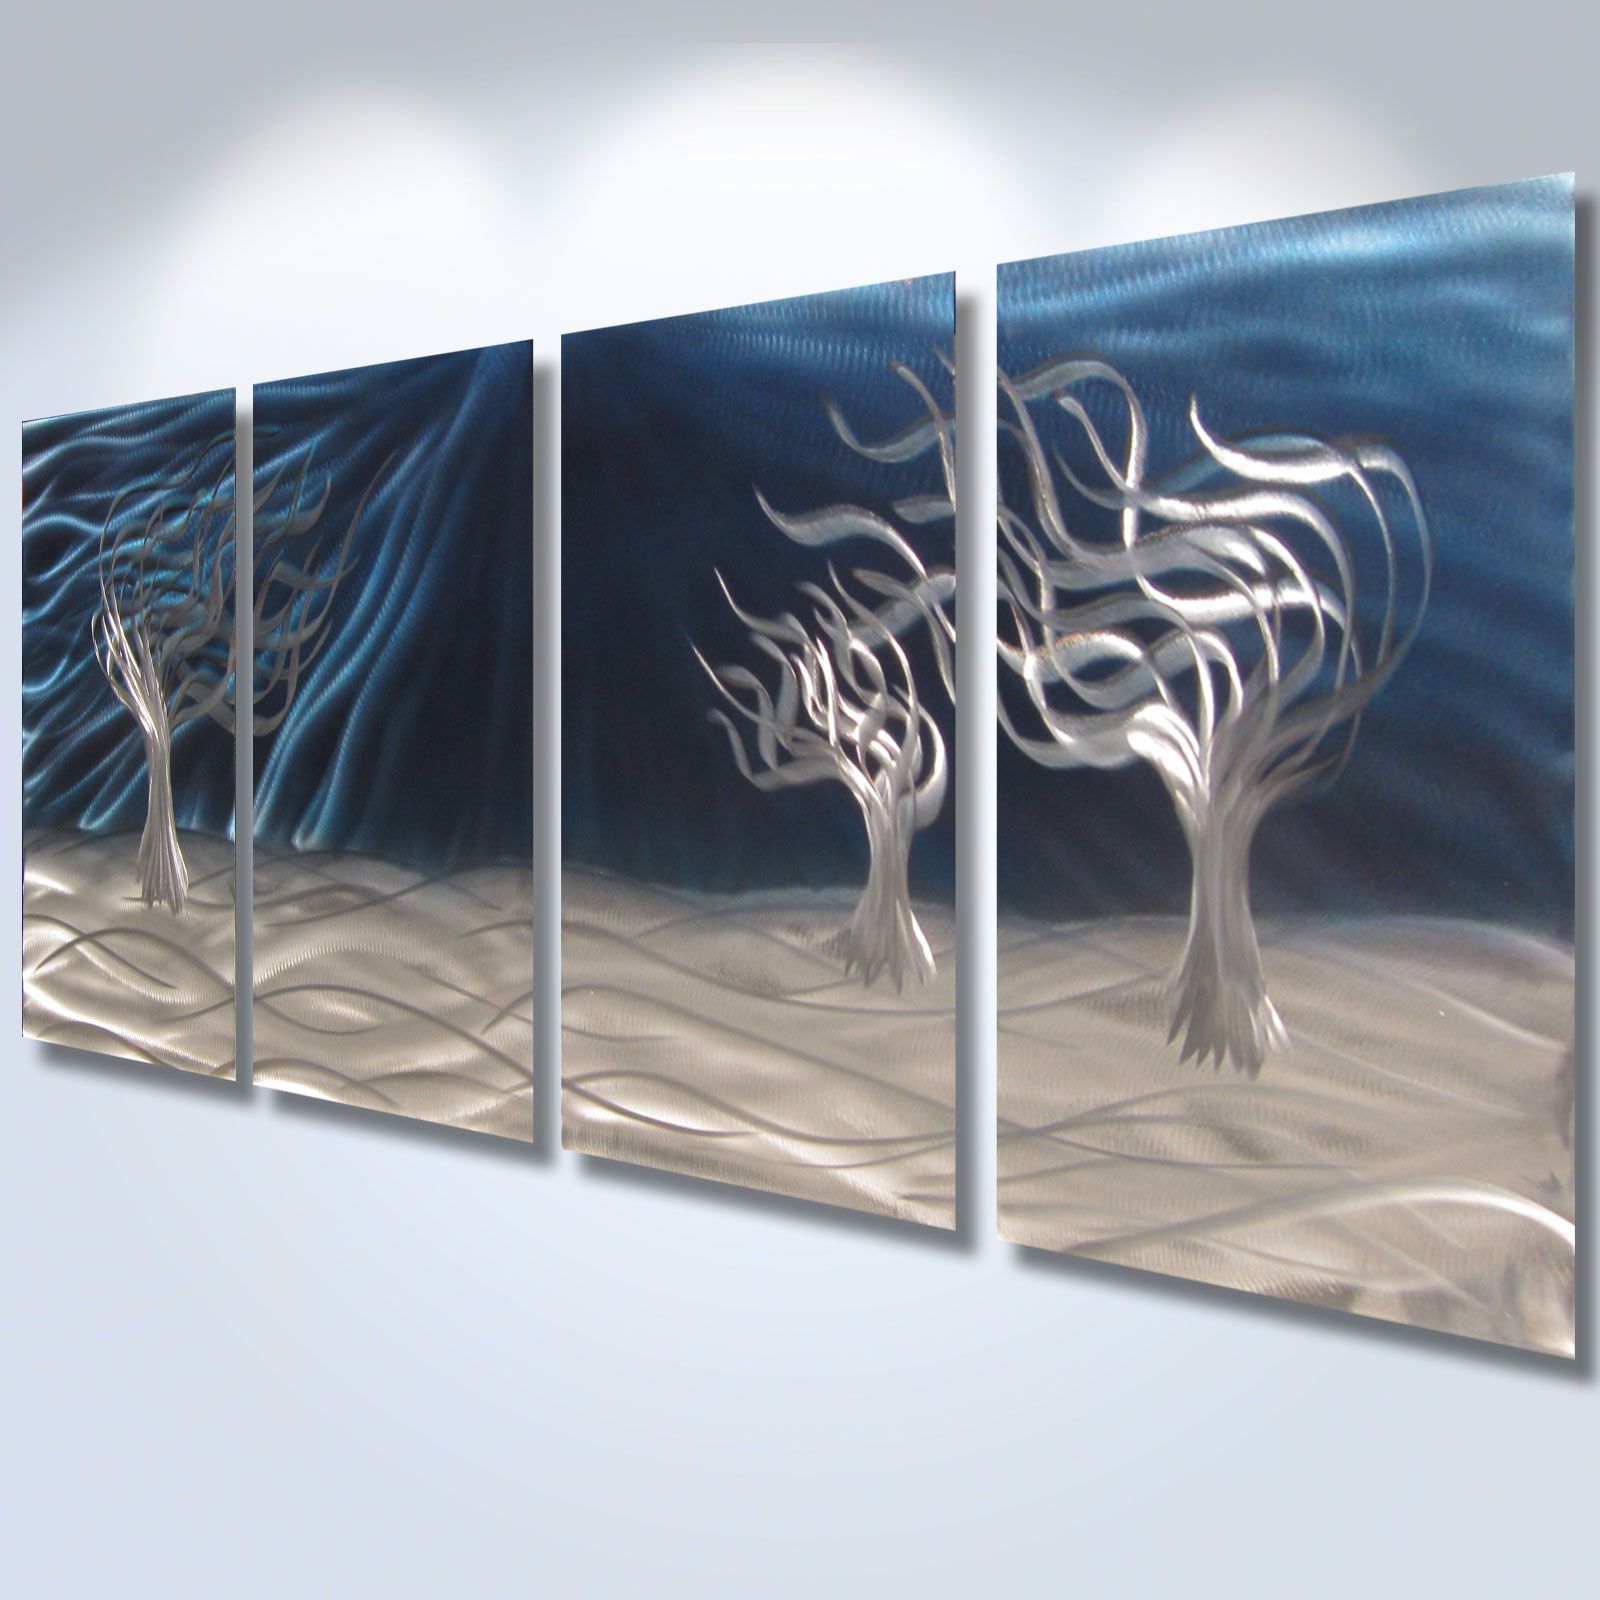 3 Trees Blue – Abstract Metal Wall Art Contemporary Modern Decor Inside Most Up To Date Trees Silver Wall Art (View 2 of 20)